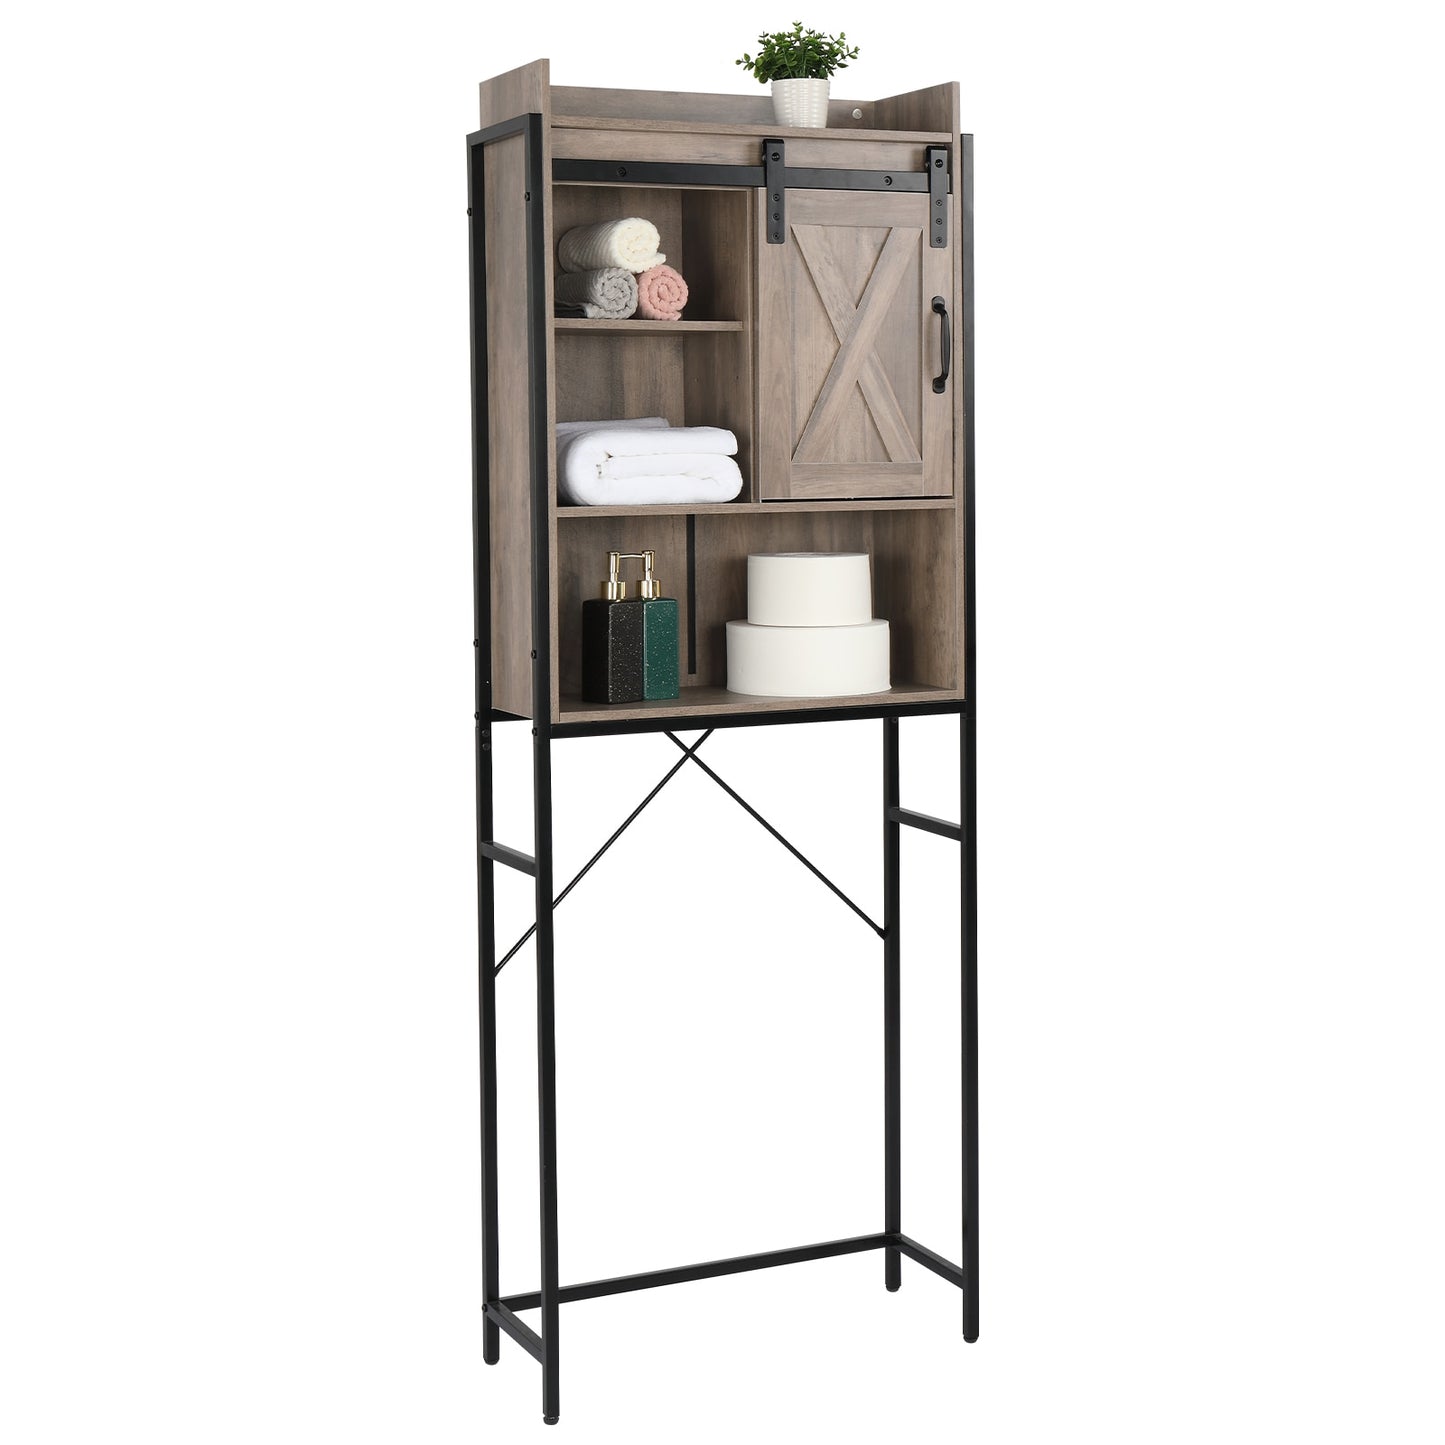 Iron Frame Retro Bathroom Cabinets: Sold Separately or as a Set